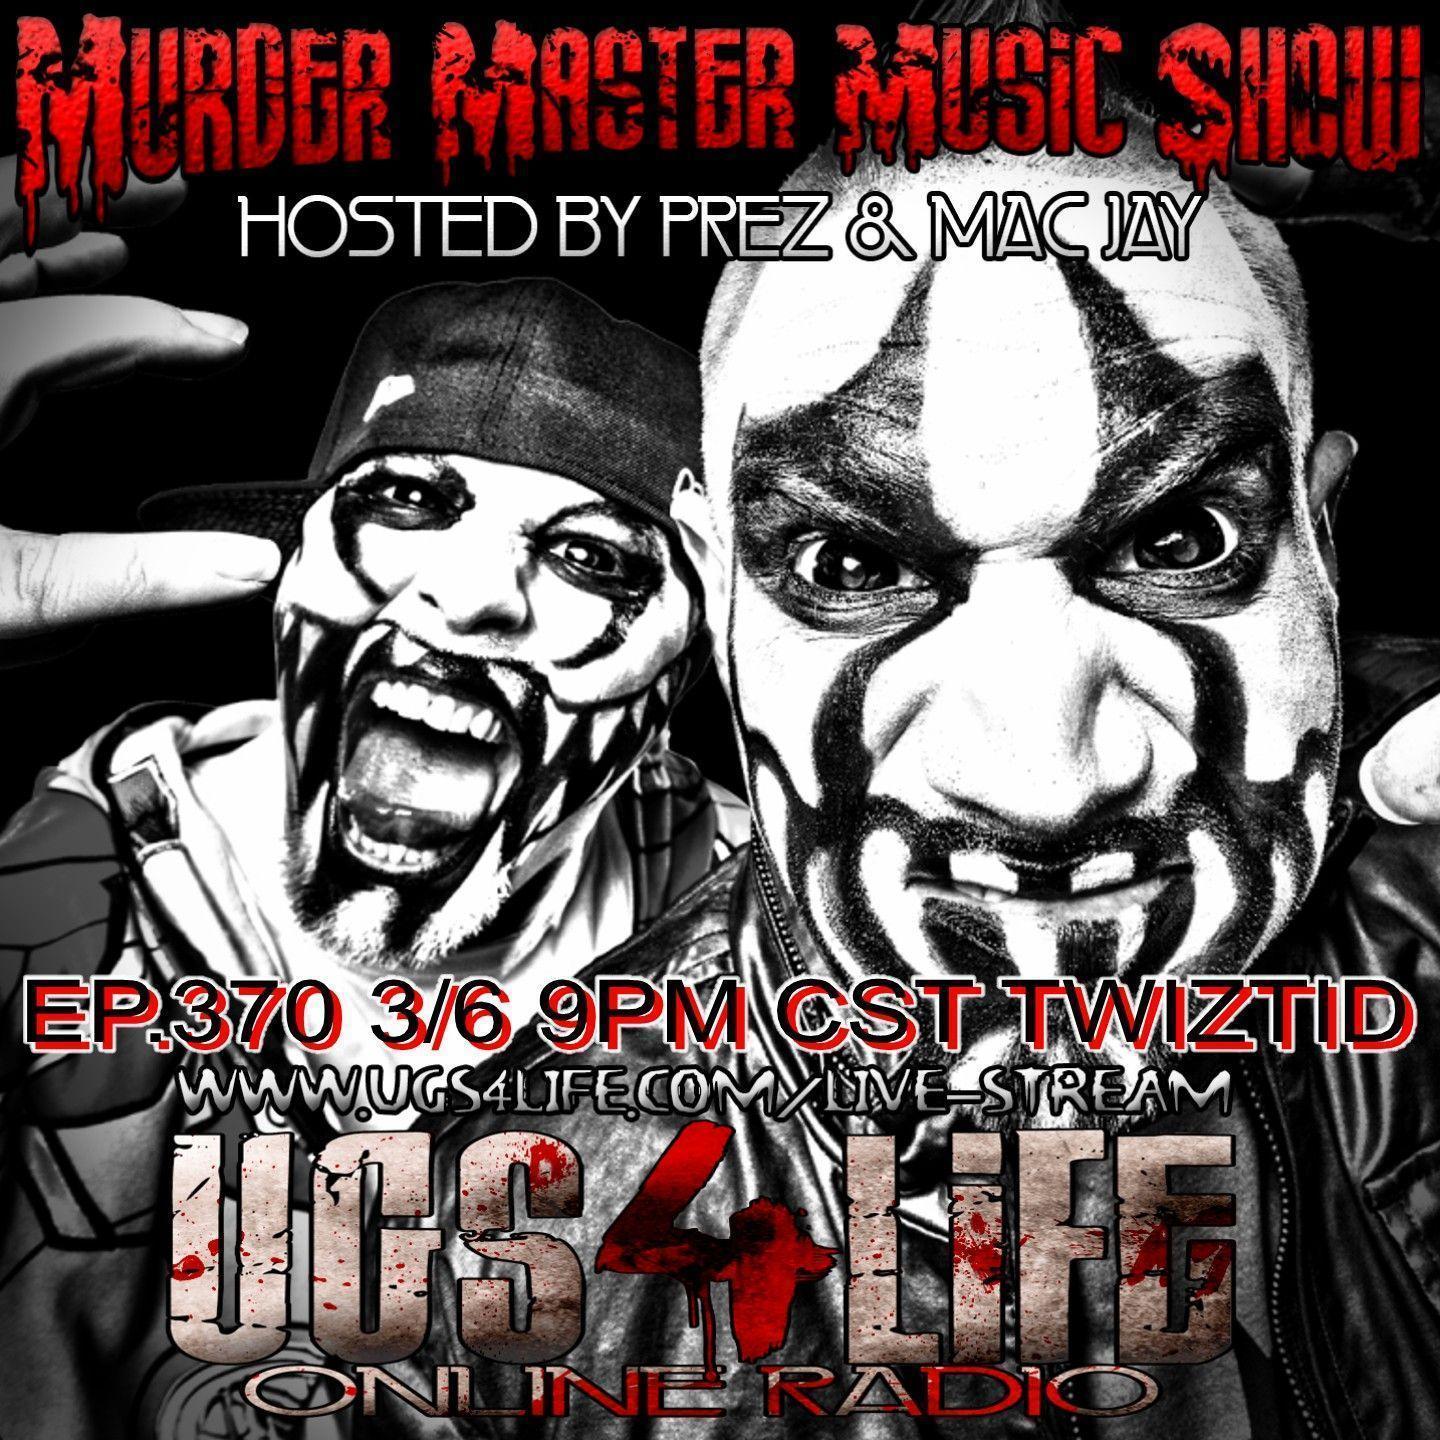 UPDATE: CANCELED Twiztid to be interviewed by The Murder Master